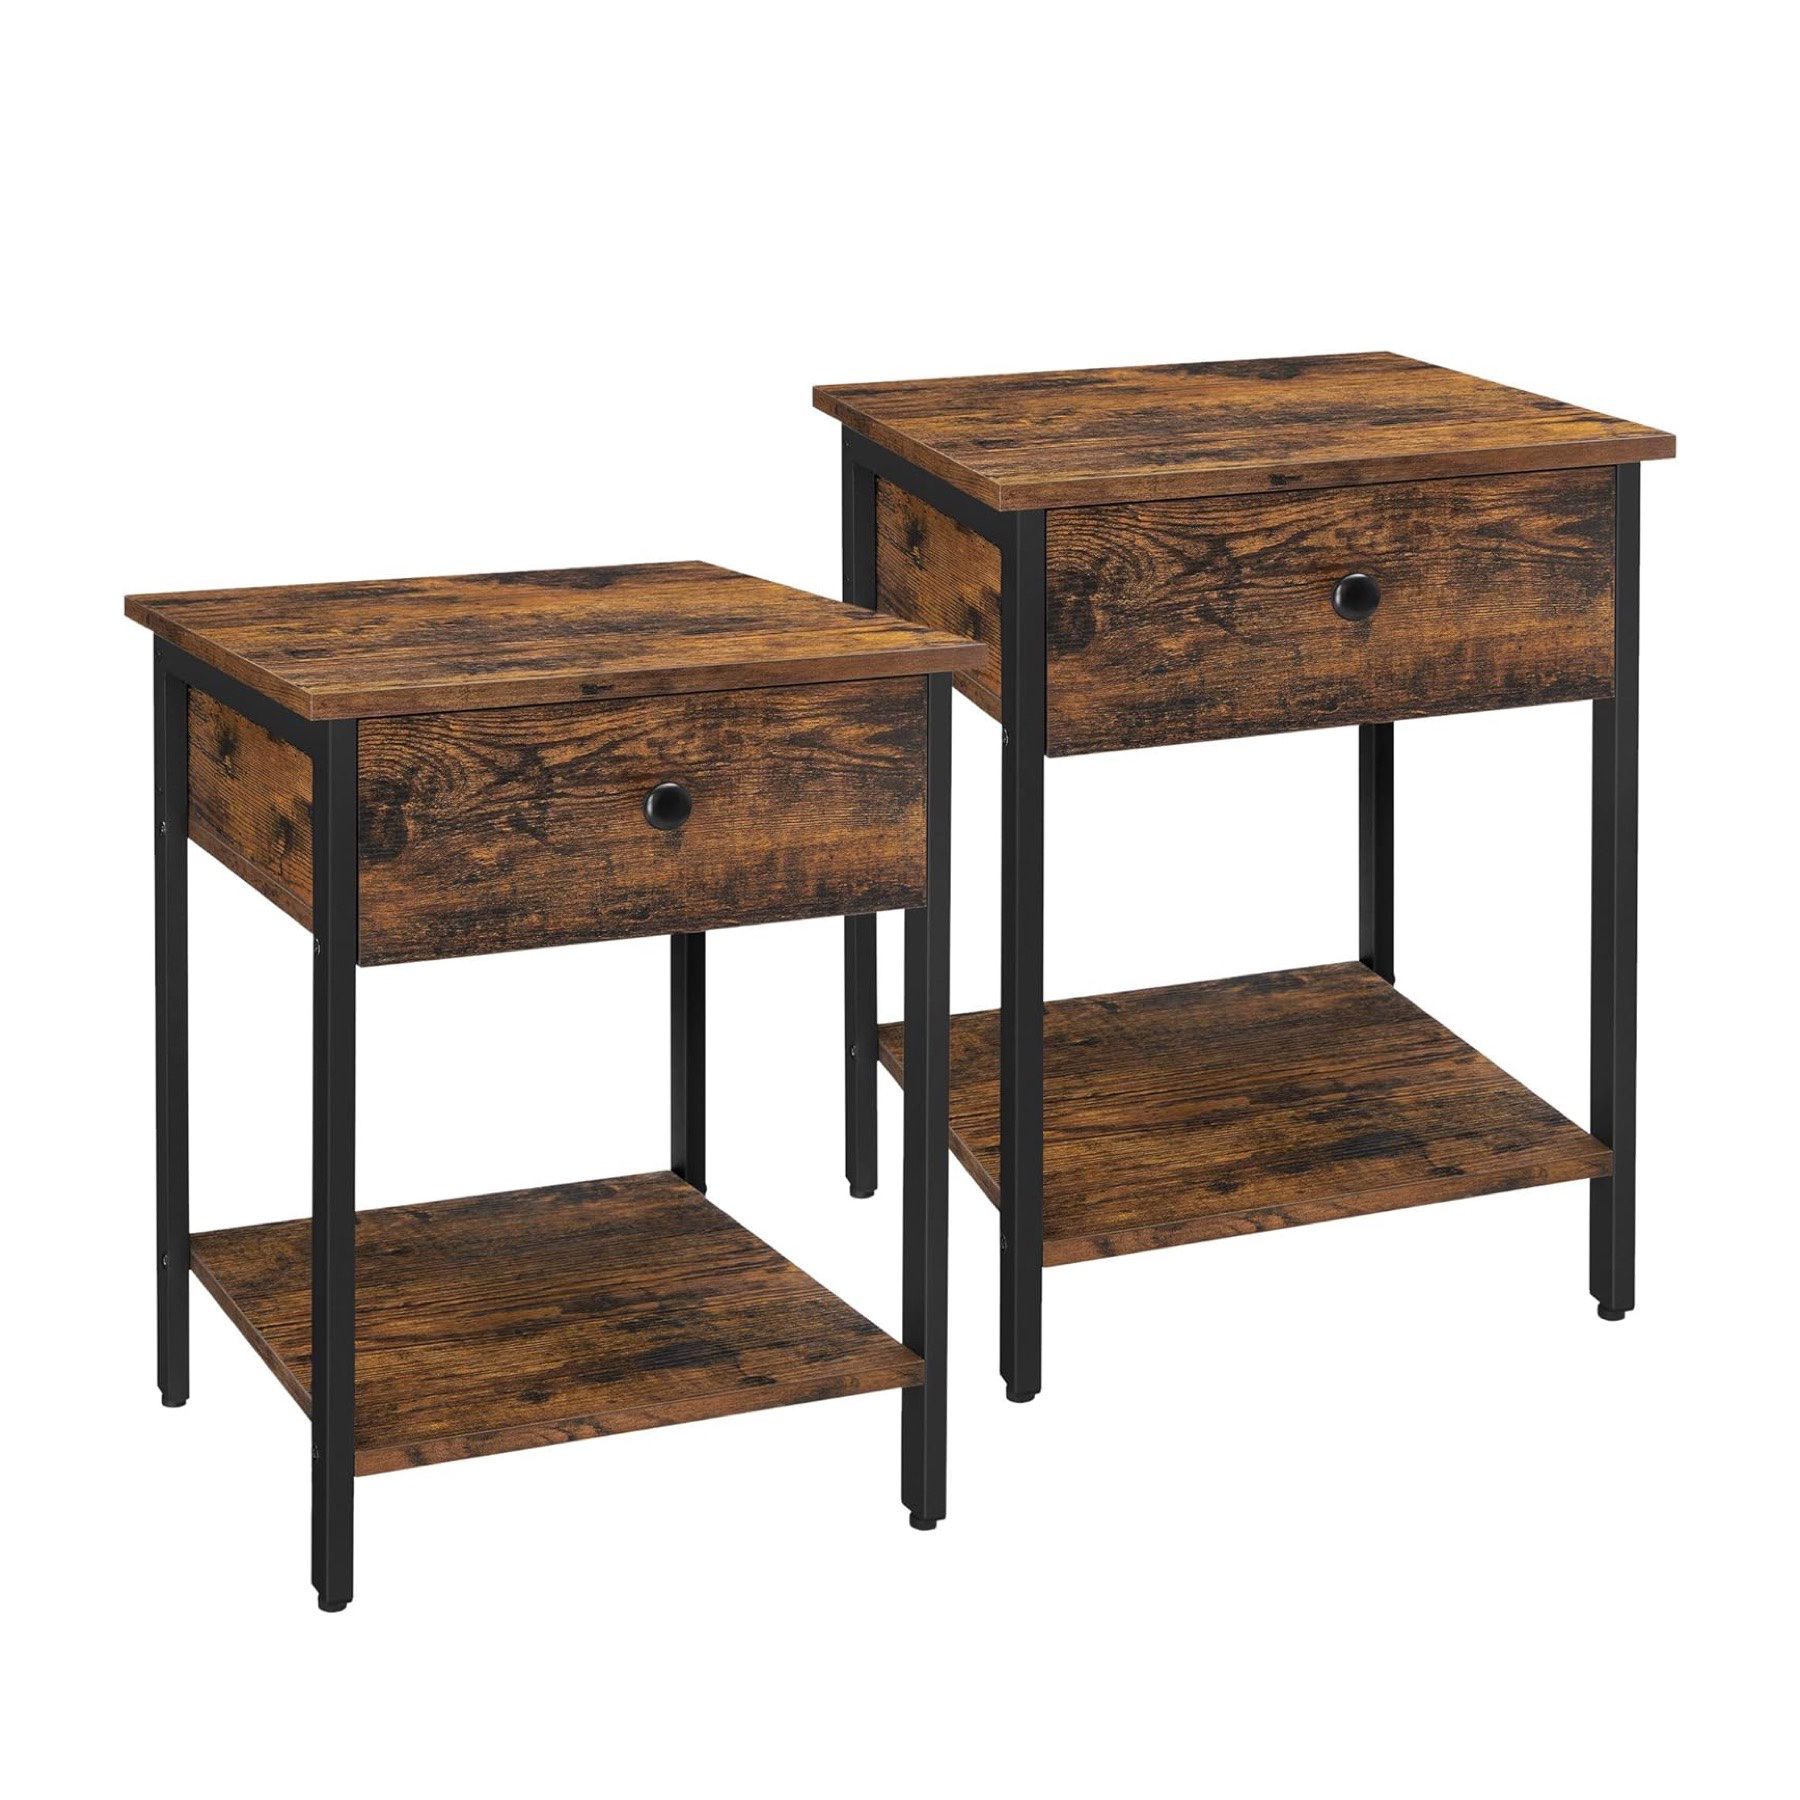 Nightstands (Set of 2pcs), Bedside Tables with Drawer, Side Tables, End Tables